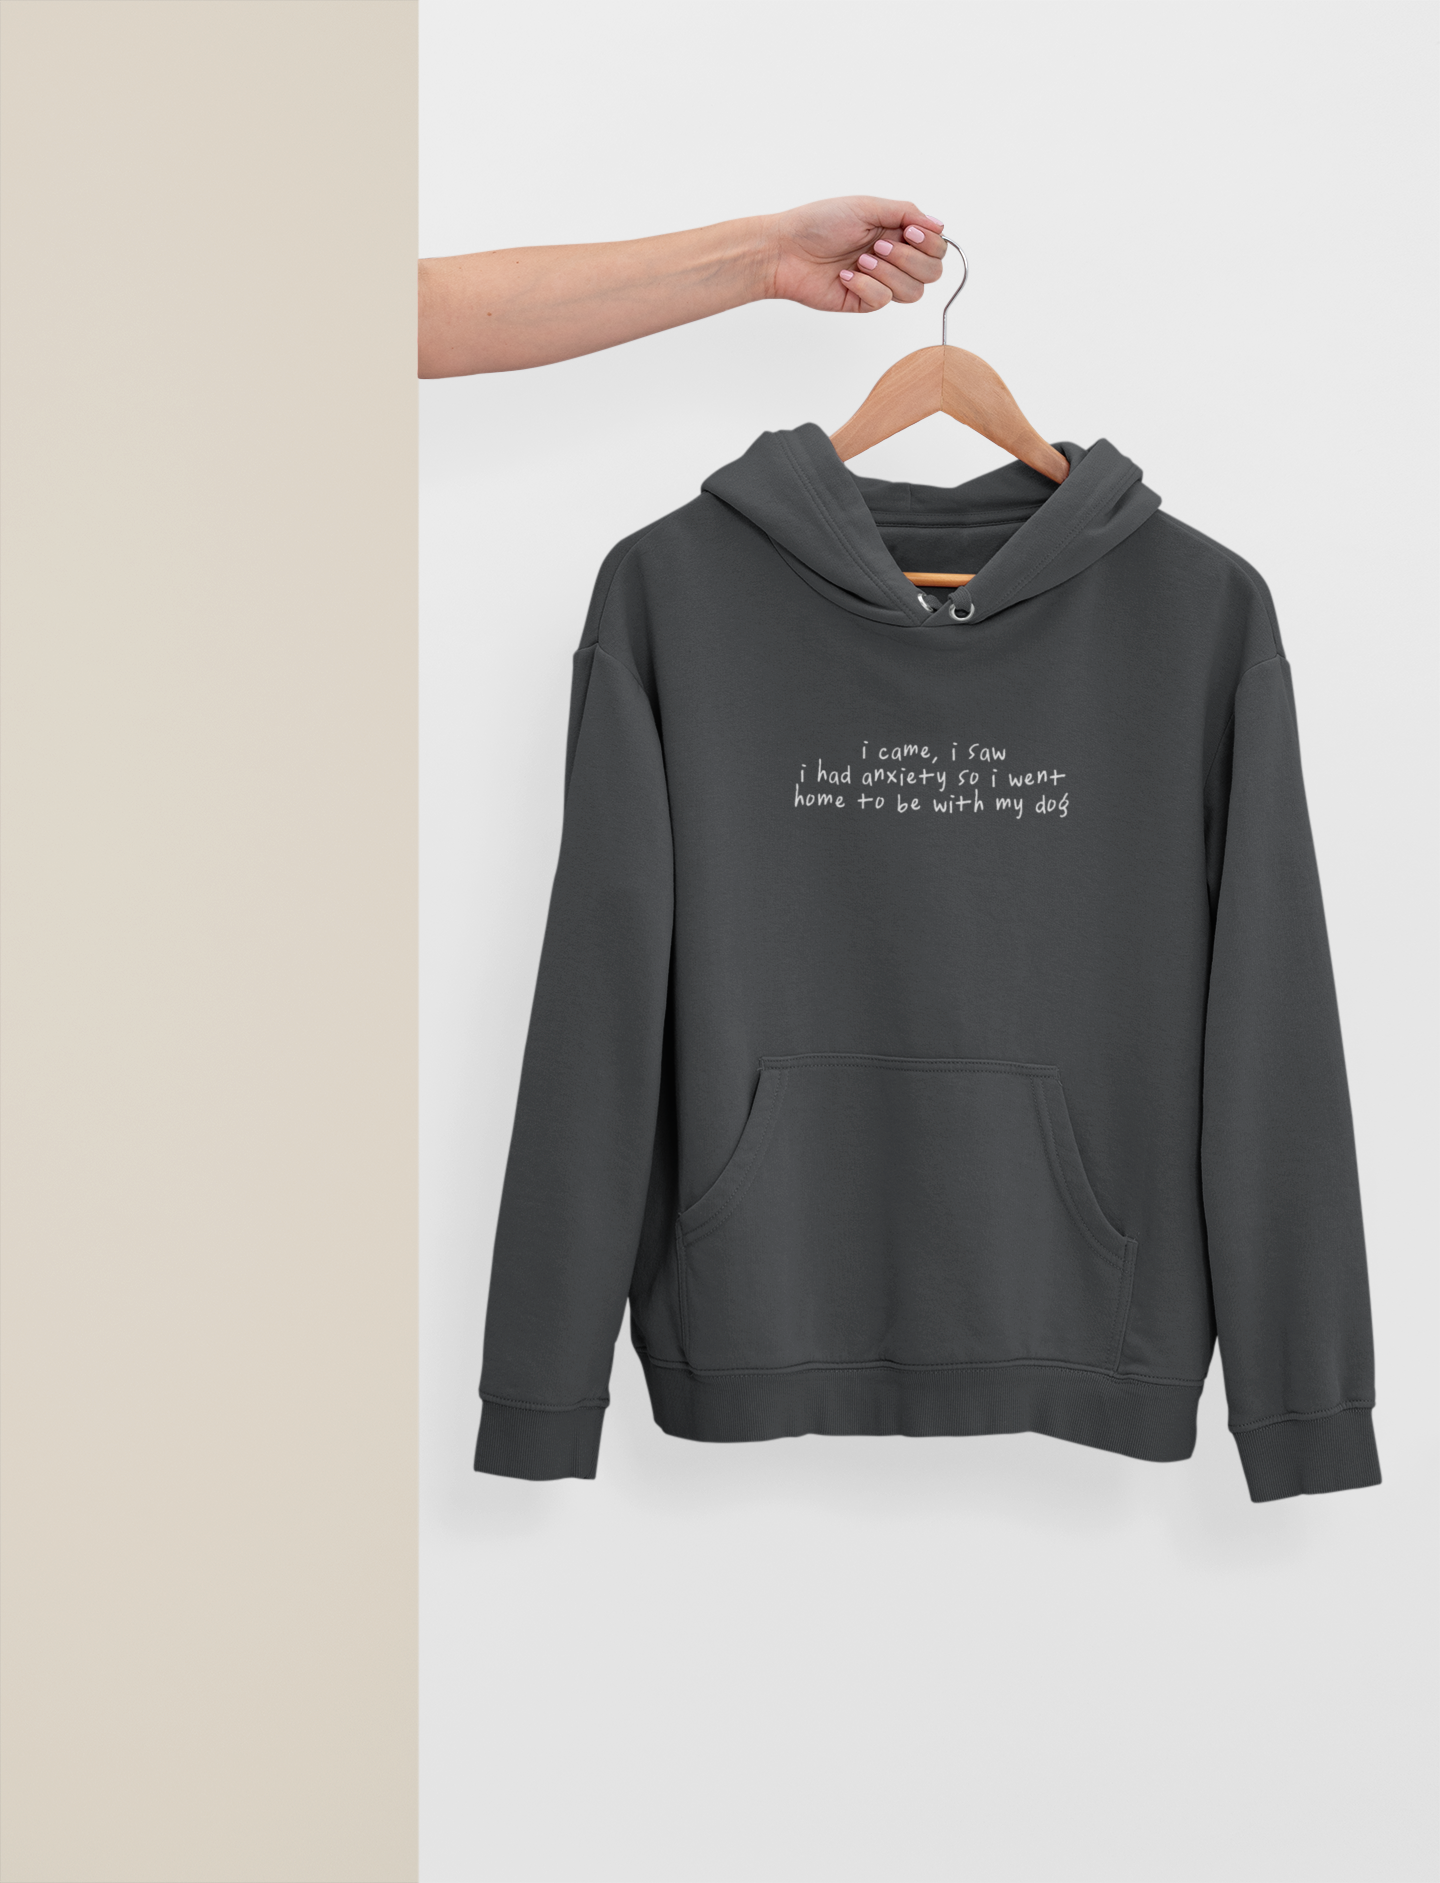 Embroidered | I Came, I Saw, I Had Anxiety So I Went Home To Be With My Dog | Unisex Hoodie